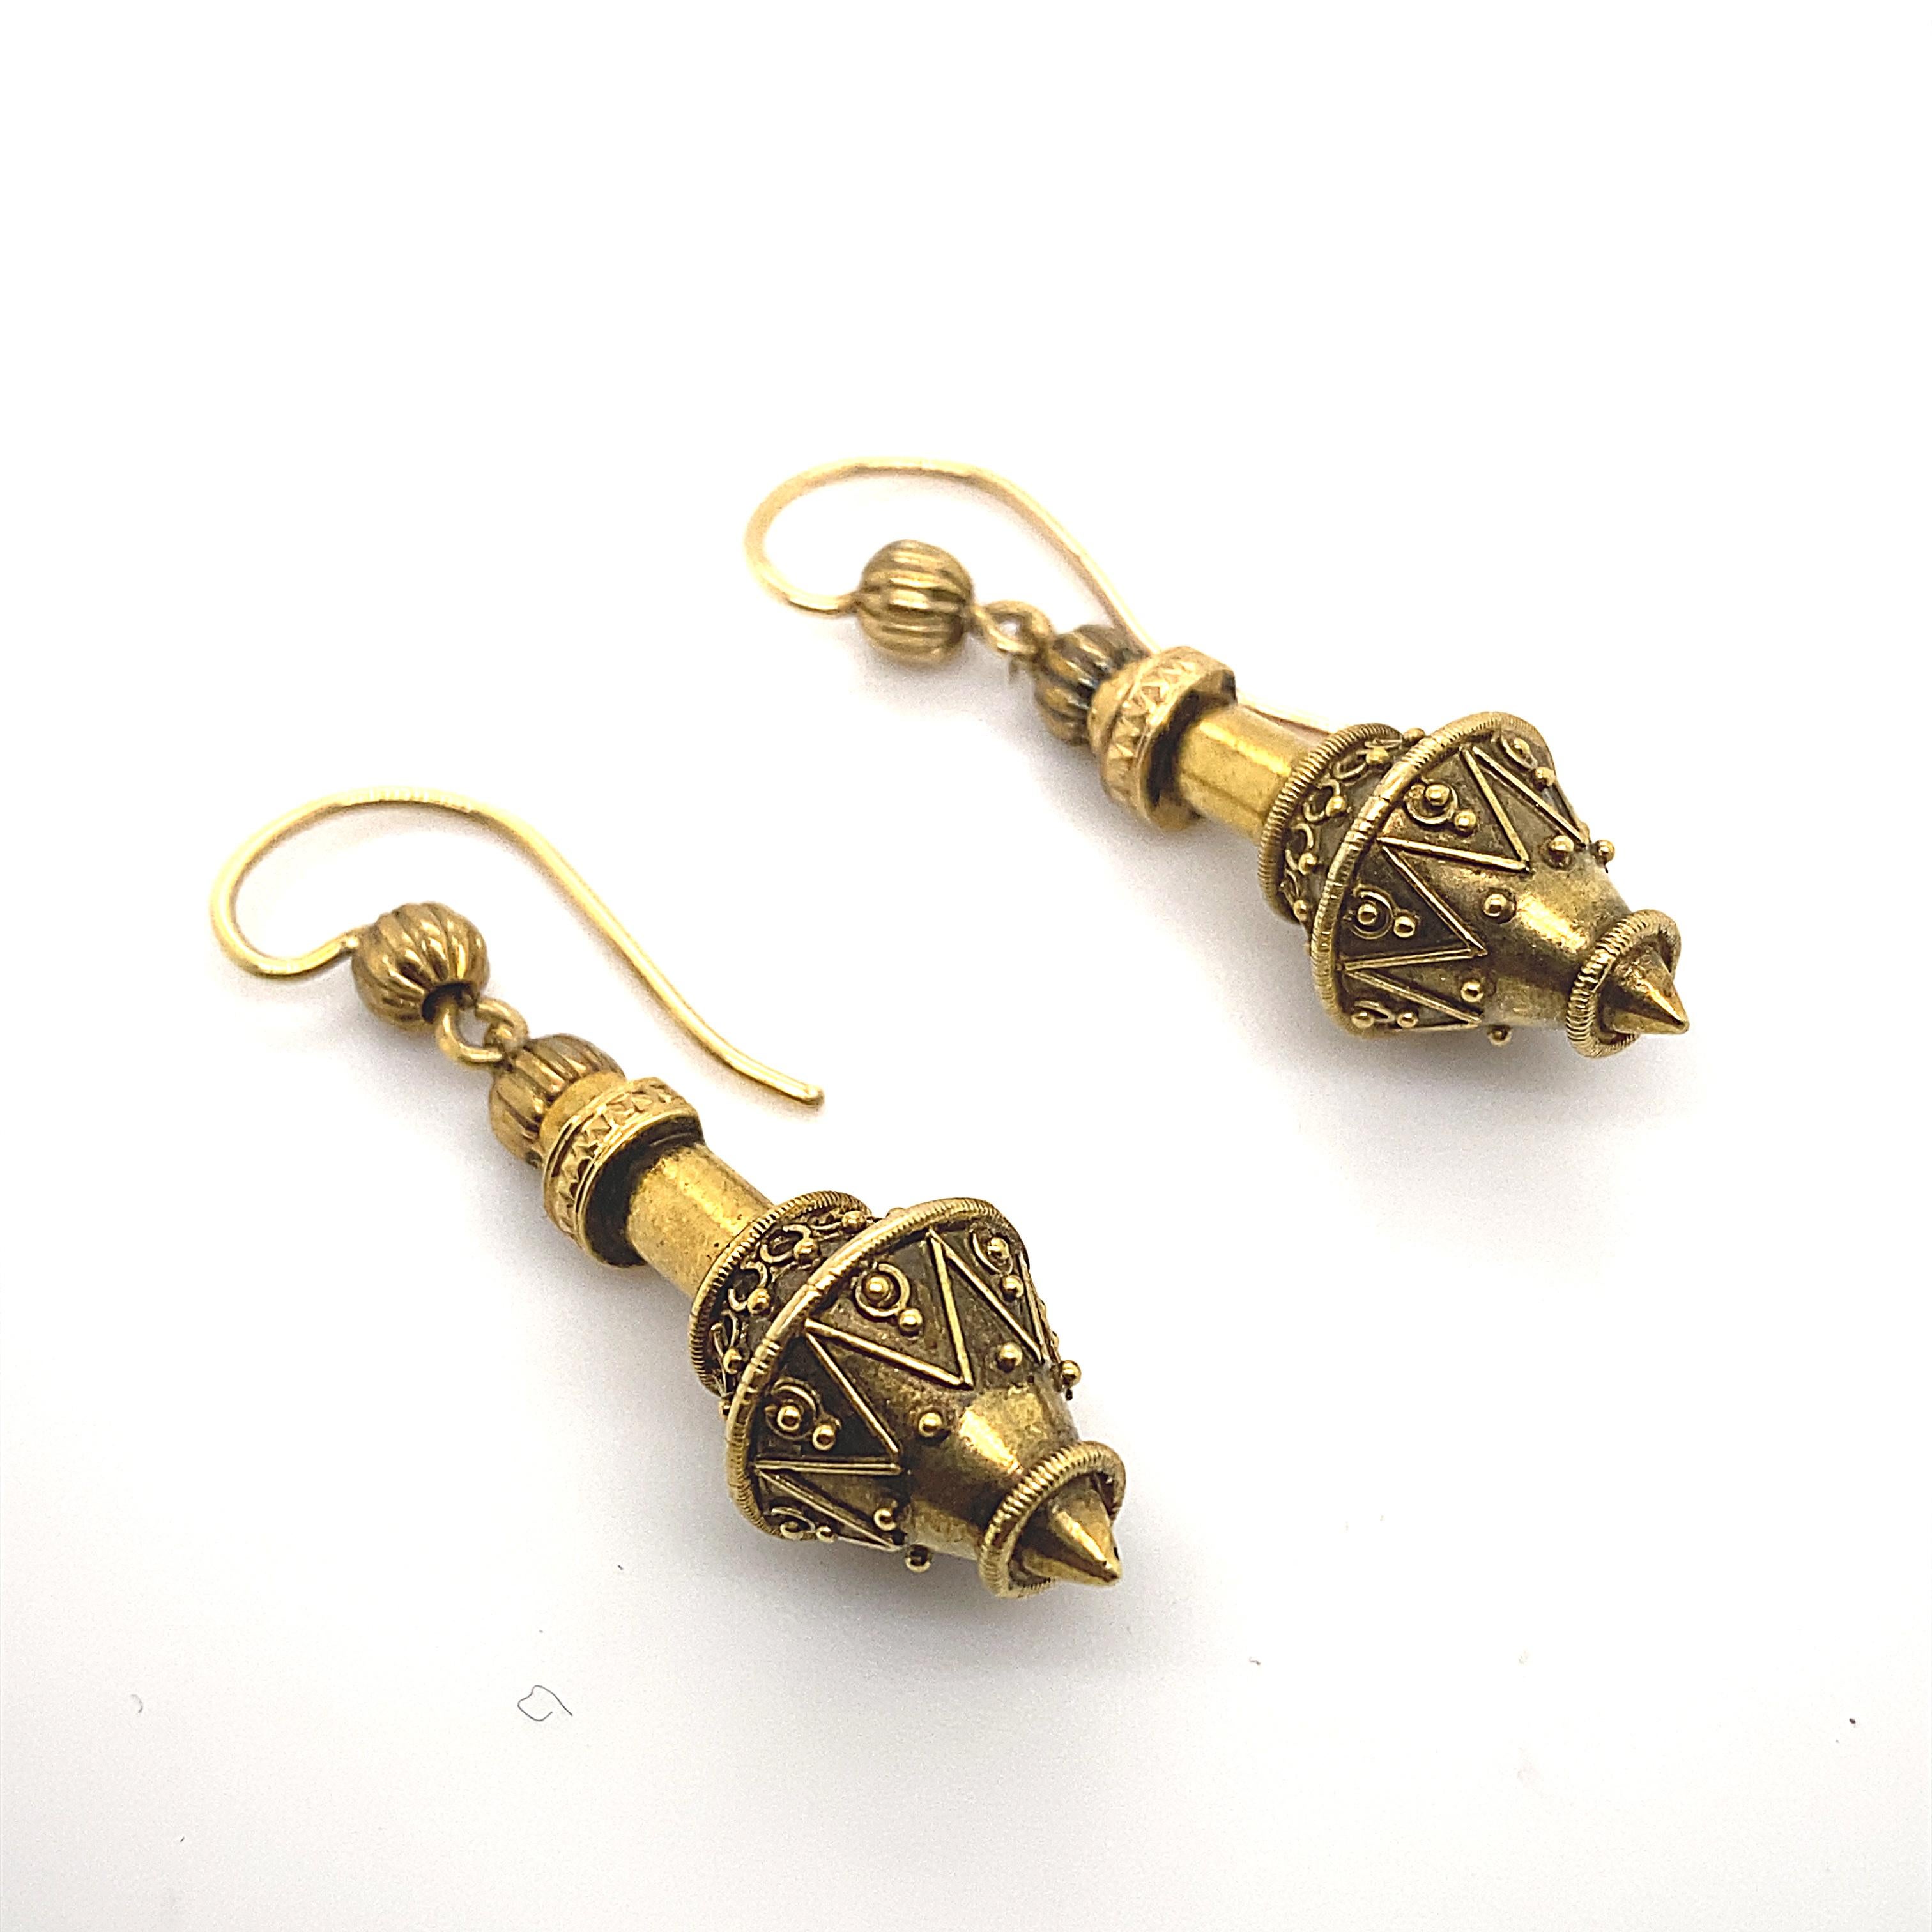 A pair of Victorian 18 karat yellow gold drop earrings.

Designed as rounded arrow shapes featuring fine granulation gold decoration throughout suspended from hook and wire fittings, and finished with open wirework designs.

These are crafted from